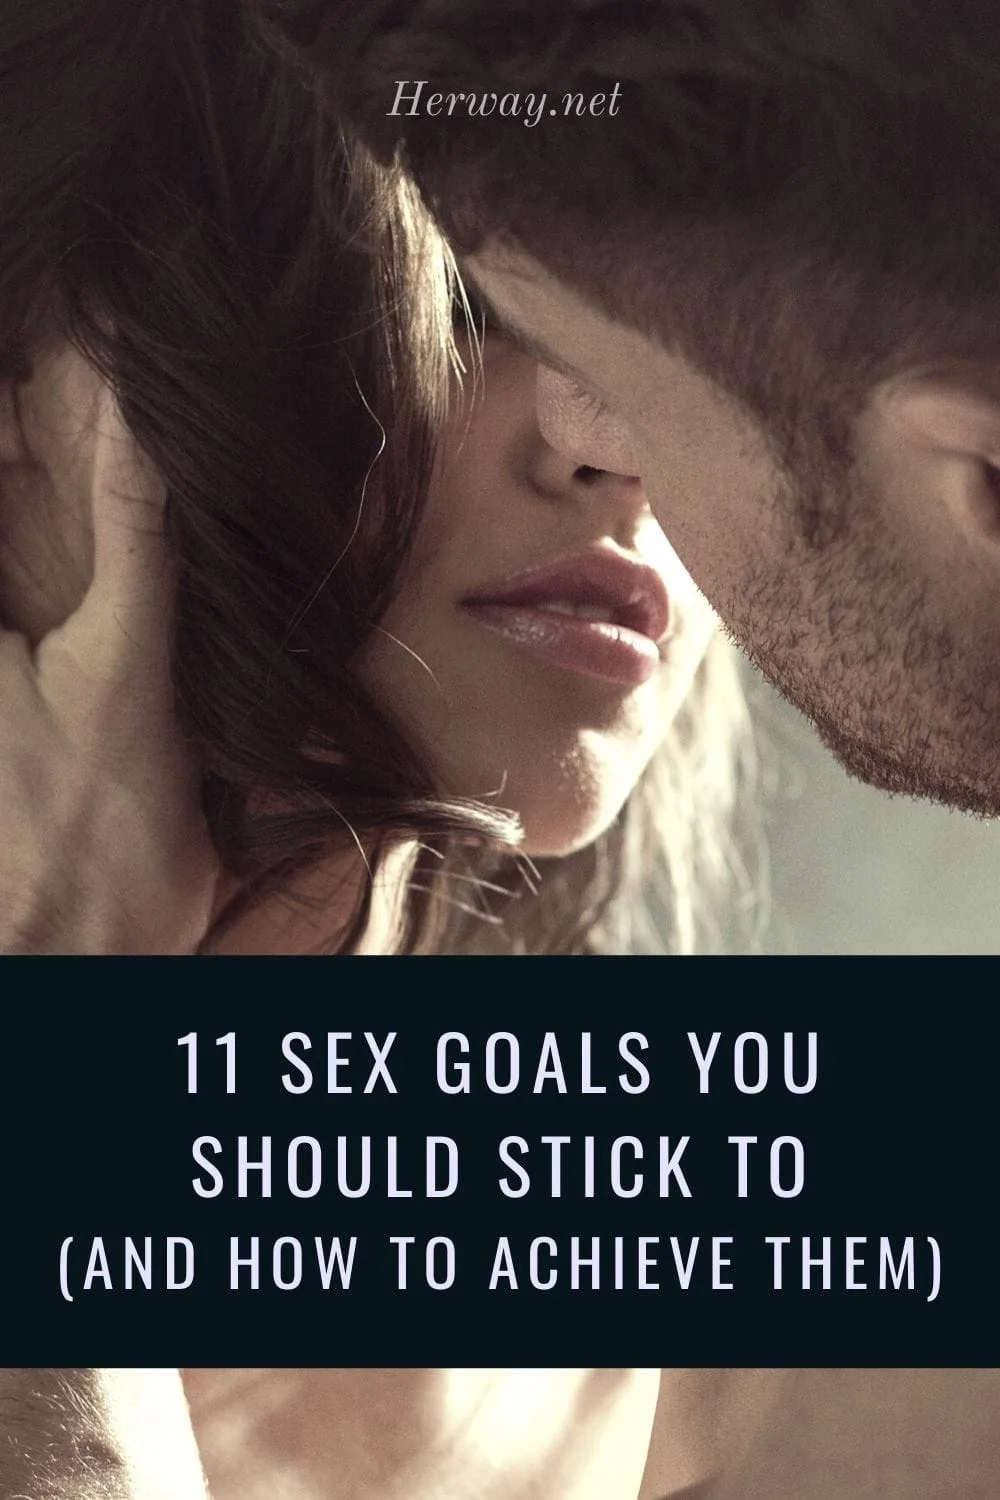 11 Sex Goals You Should Stick To (And How To Achieve Them)